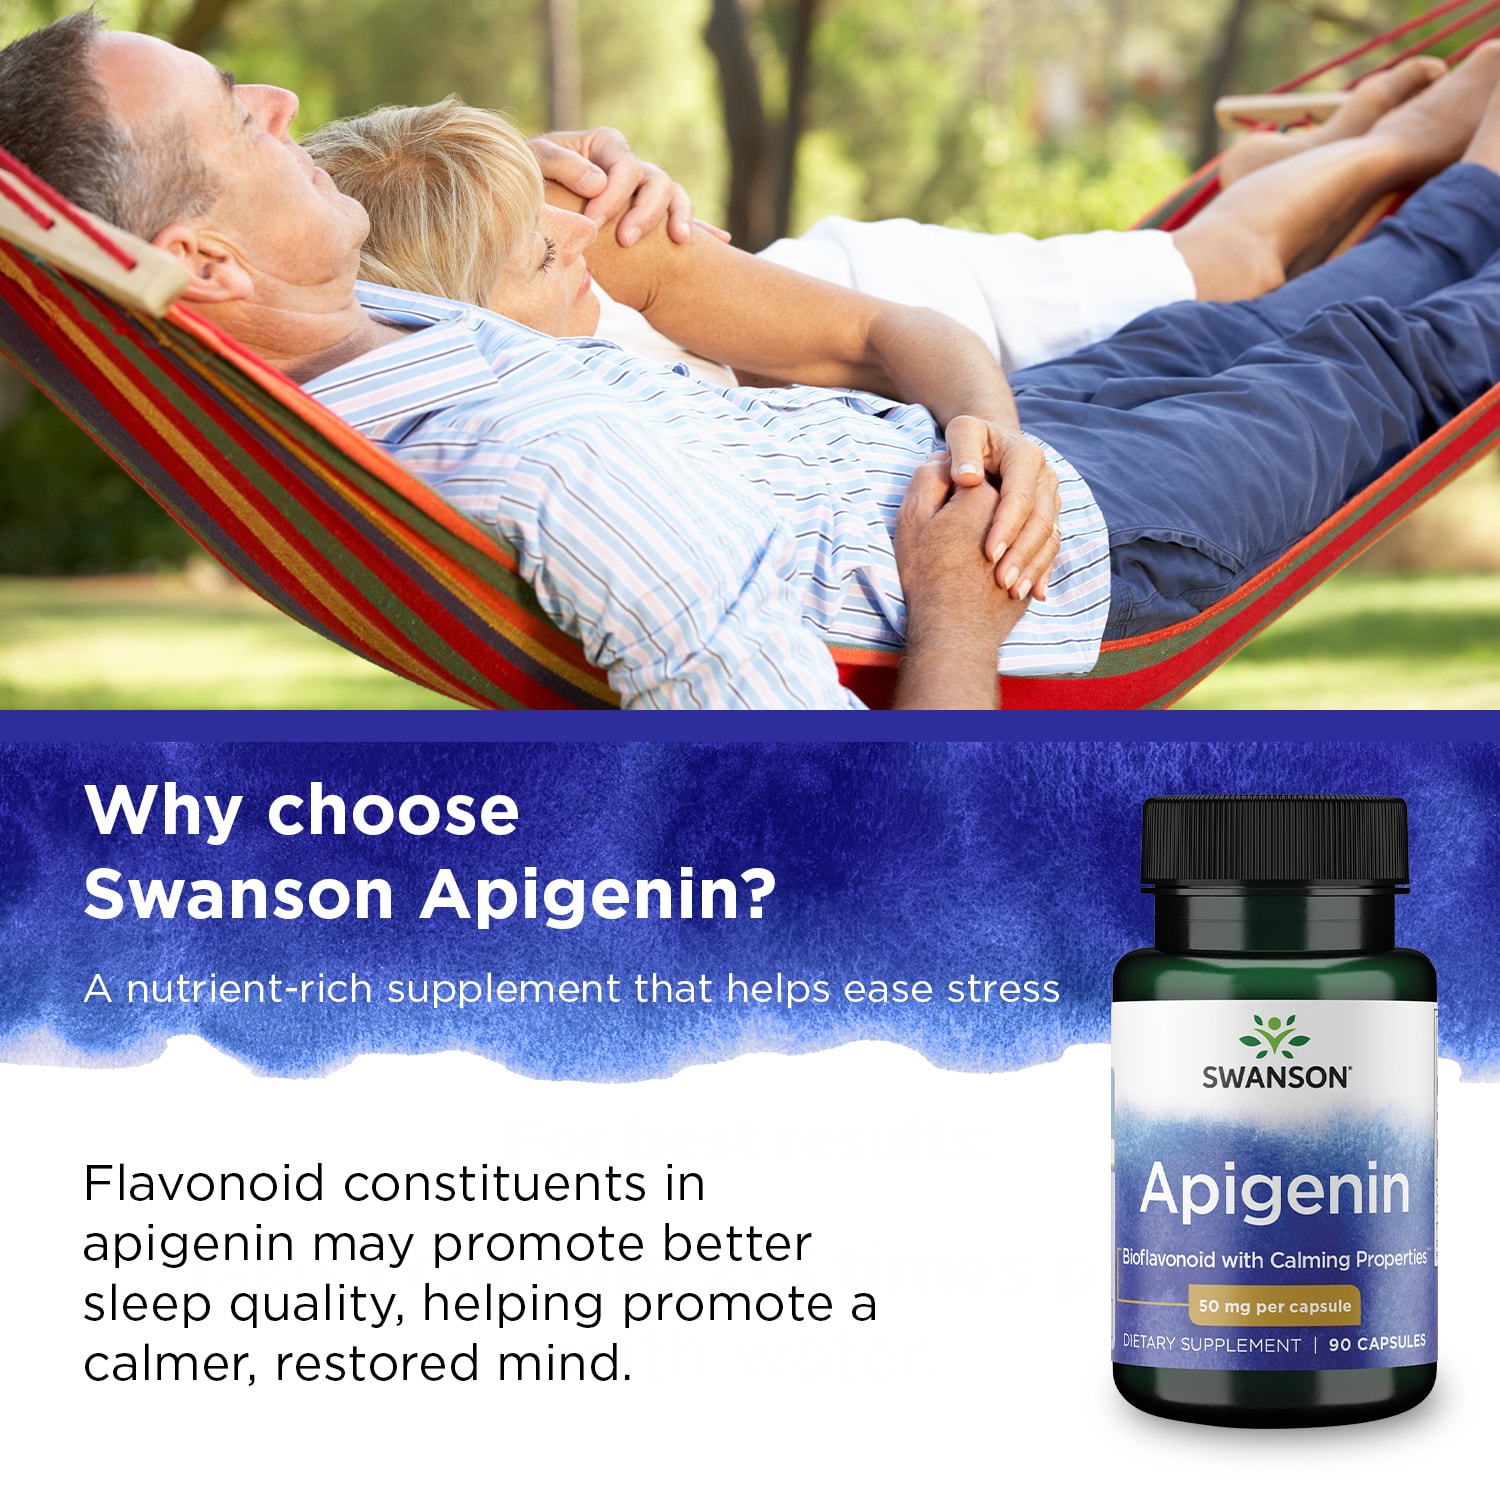 Swanson Apigenin - Natural Supplement Promoting Prostate Health - Bioflavonoid Supplement Supporting Glucose Metabolism & Nervous System Health - (90 Capsules, 50mg Each) - image 5 of 5